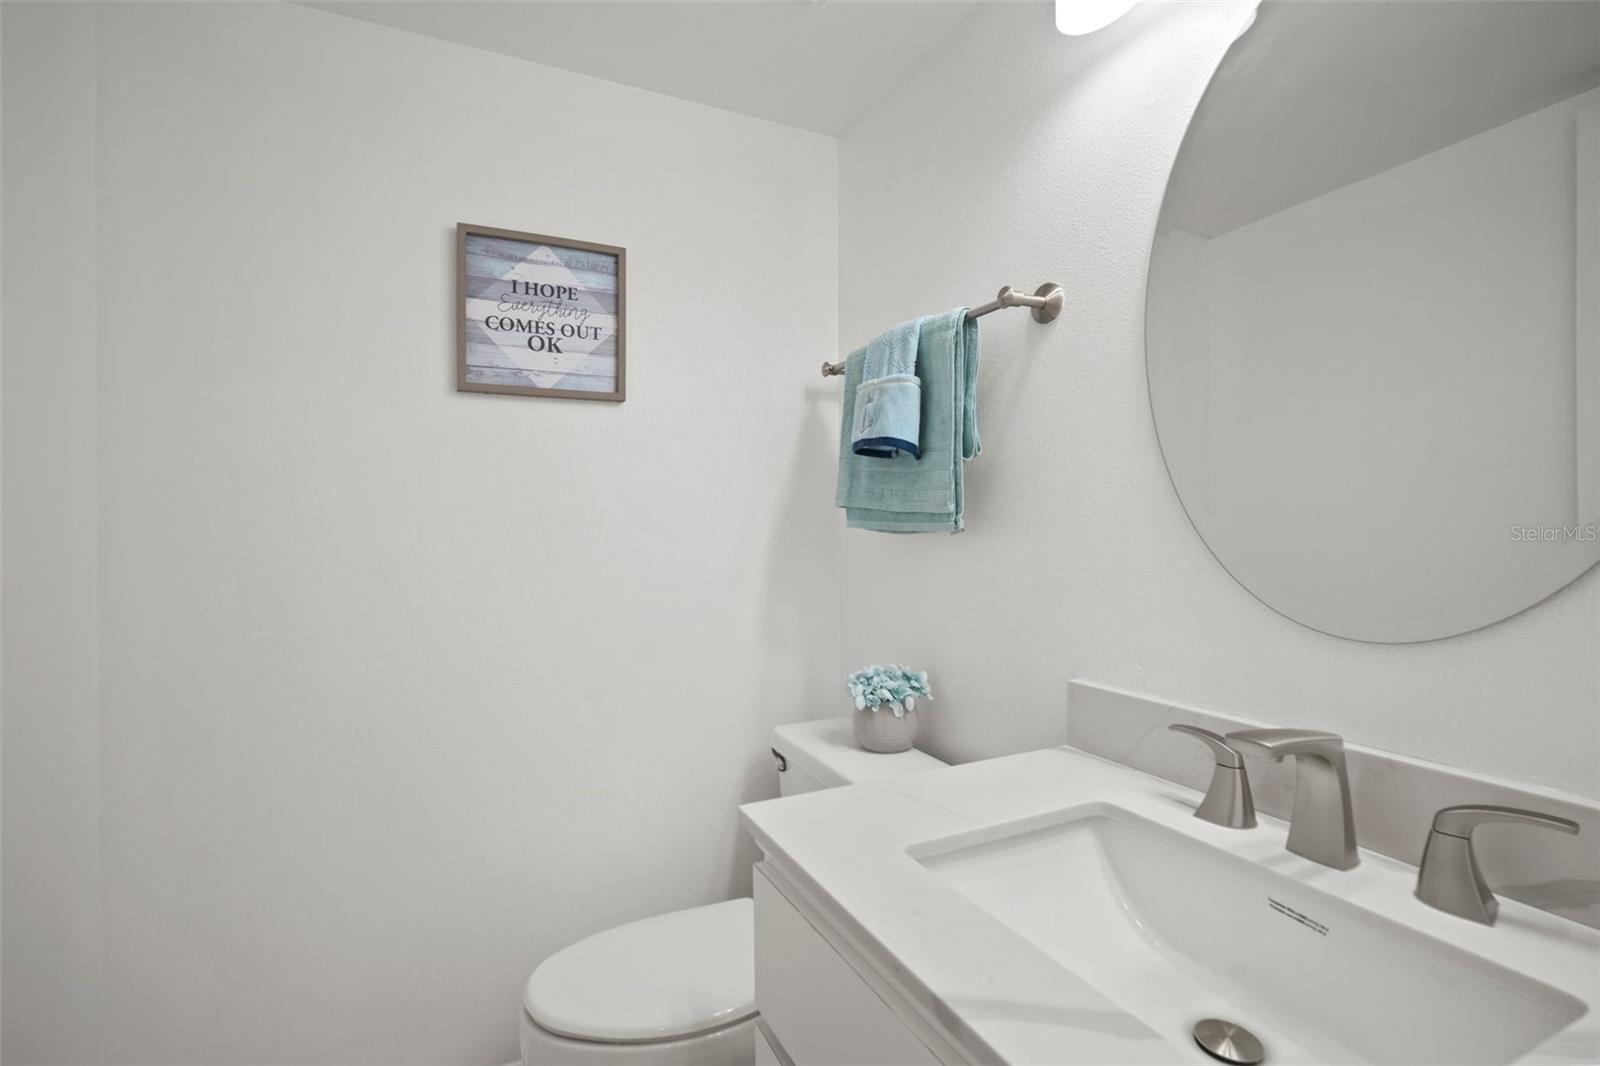 1/2 Bath located between the kitchen and the dining room. Located right at the bottom of the stairs.